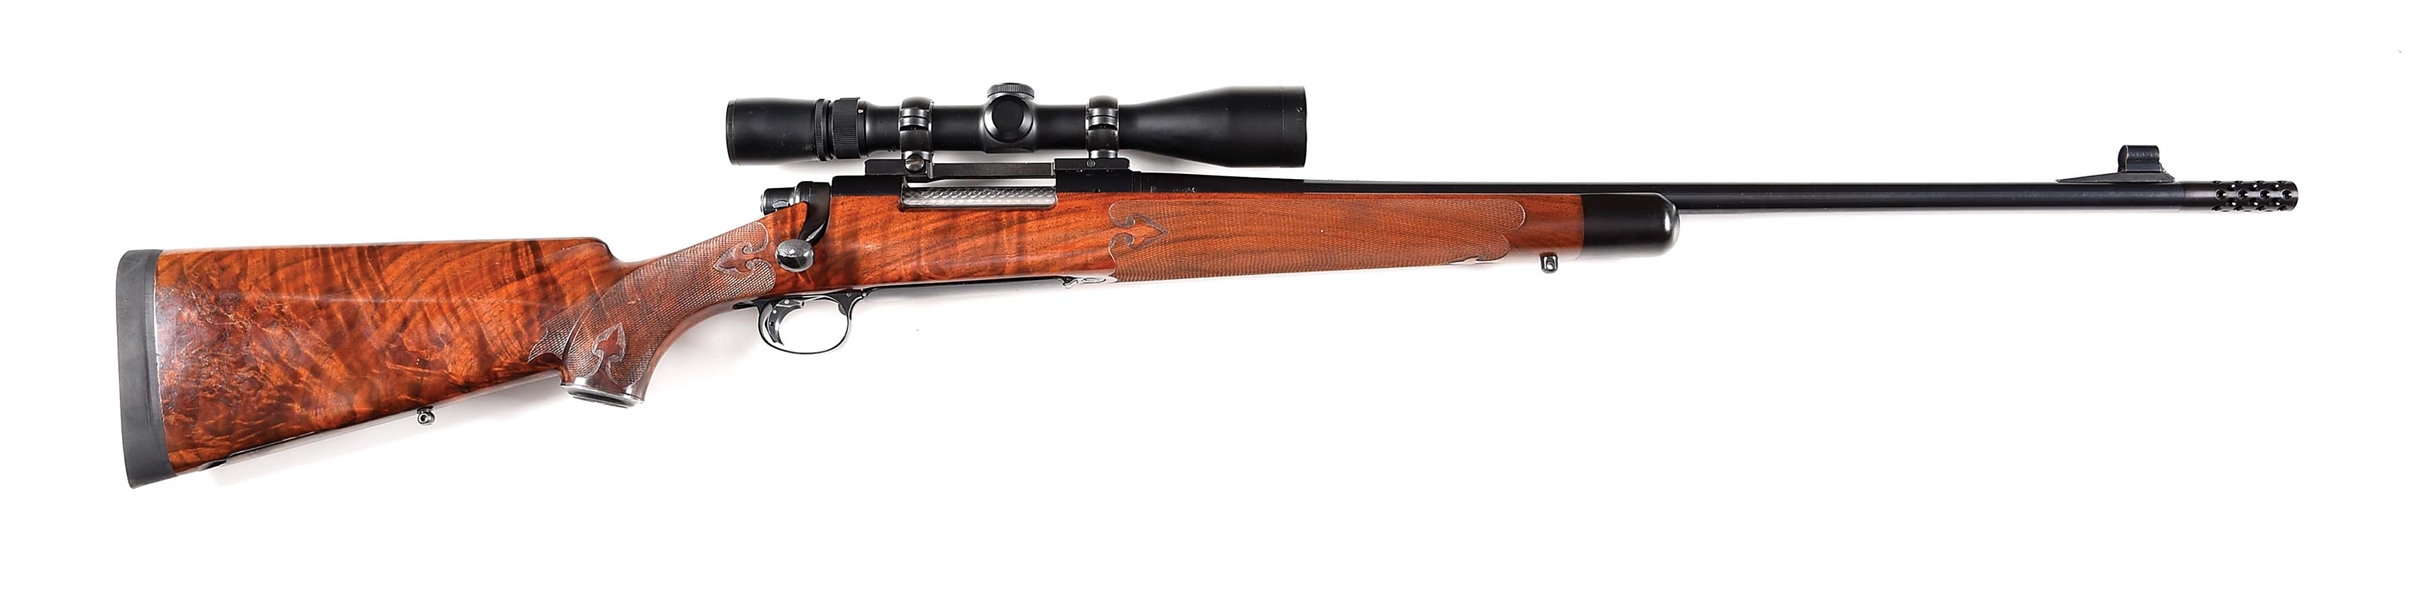 (M) REMINGTON MODEL 700 CUSTOM DELUXE BOLT ACTION RIFLE WITH SCOPE.